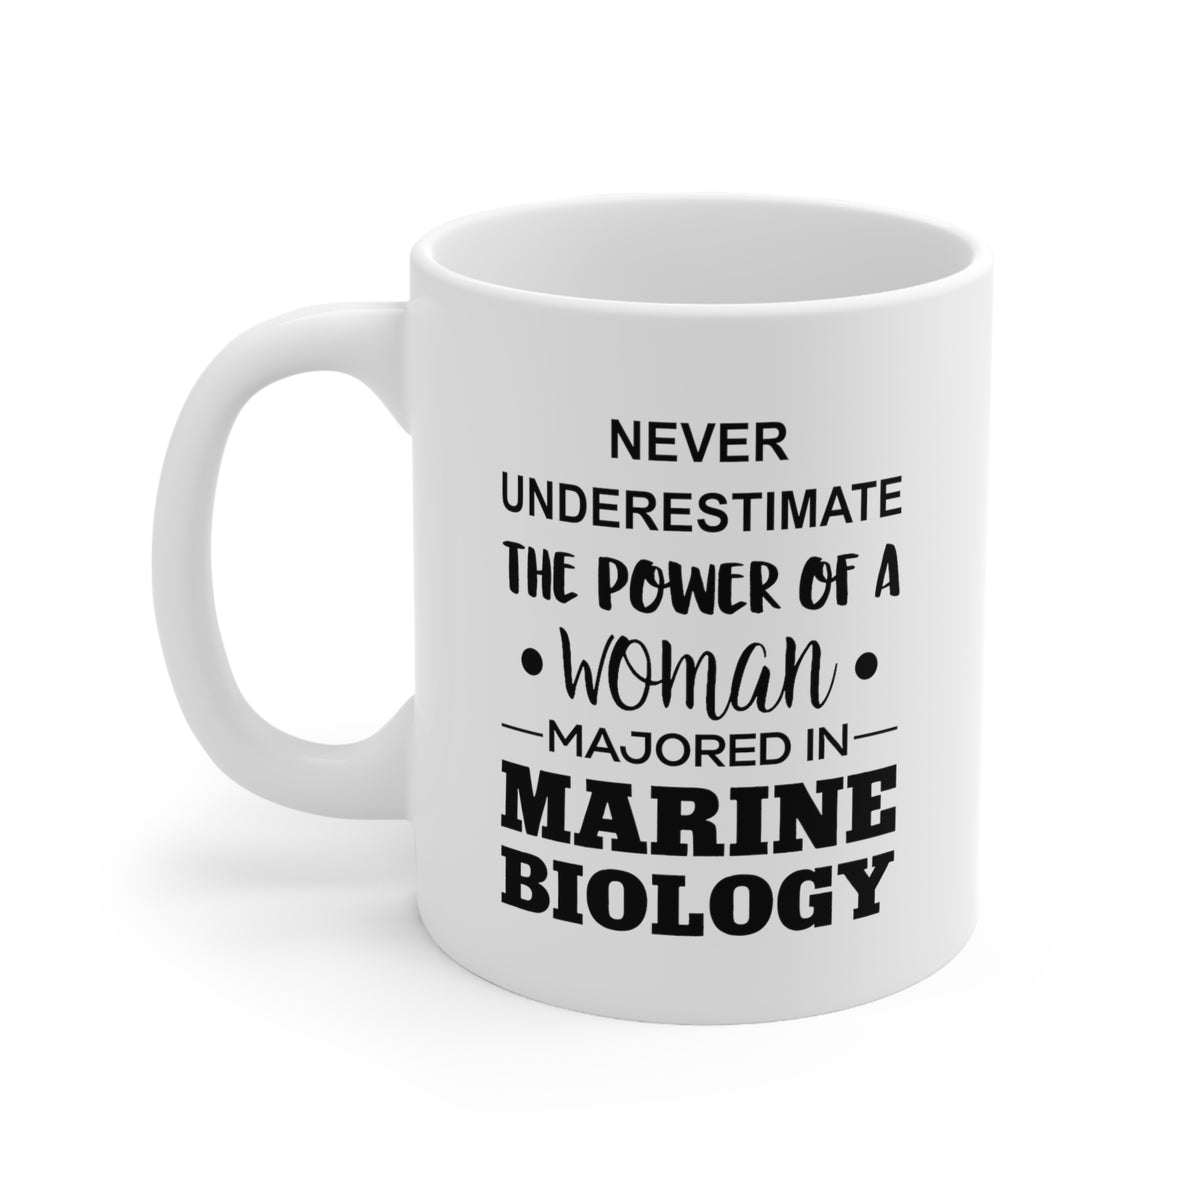 Never Underestimate The Power Of A Woman Majored In Marine Biology - Funny Marine Biologist Ceramic Coffee Cup